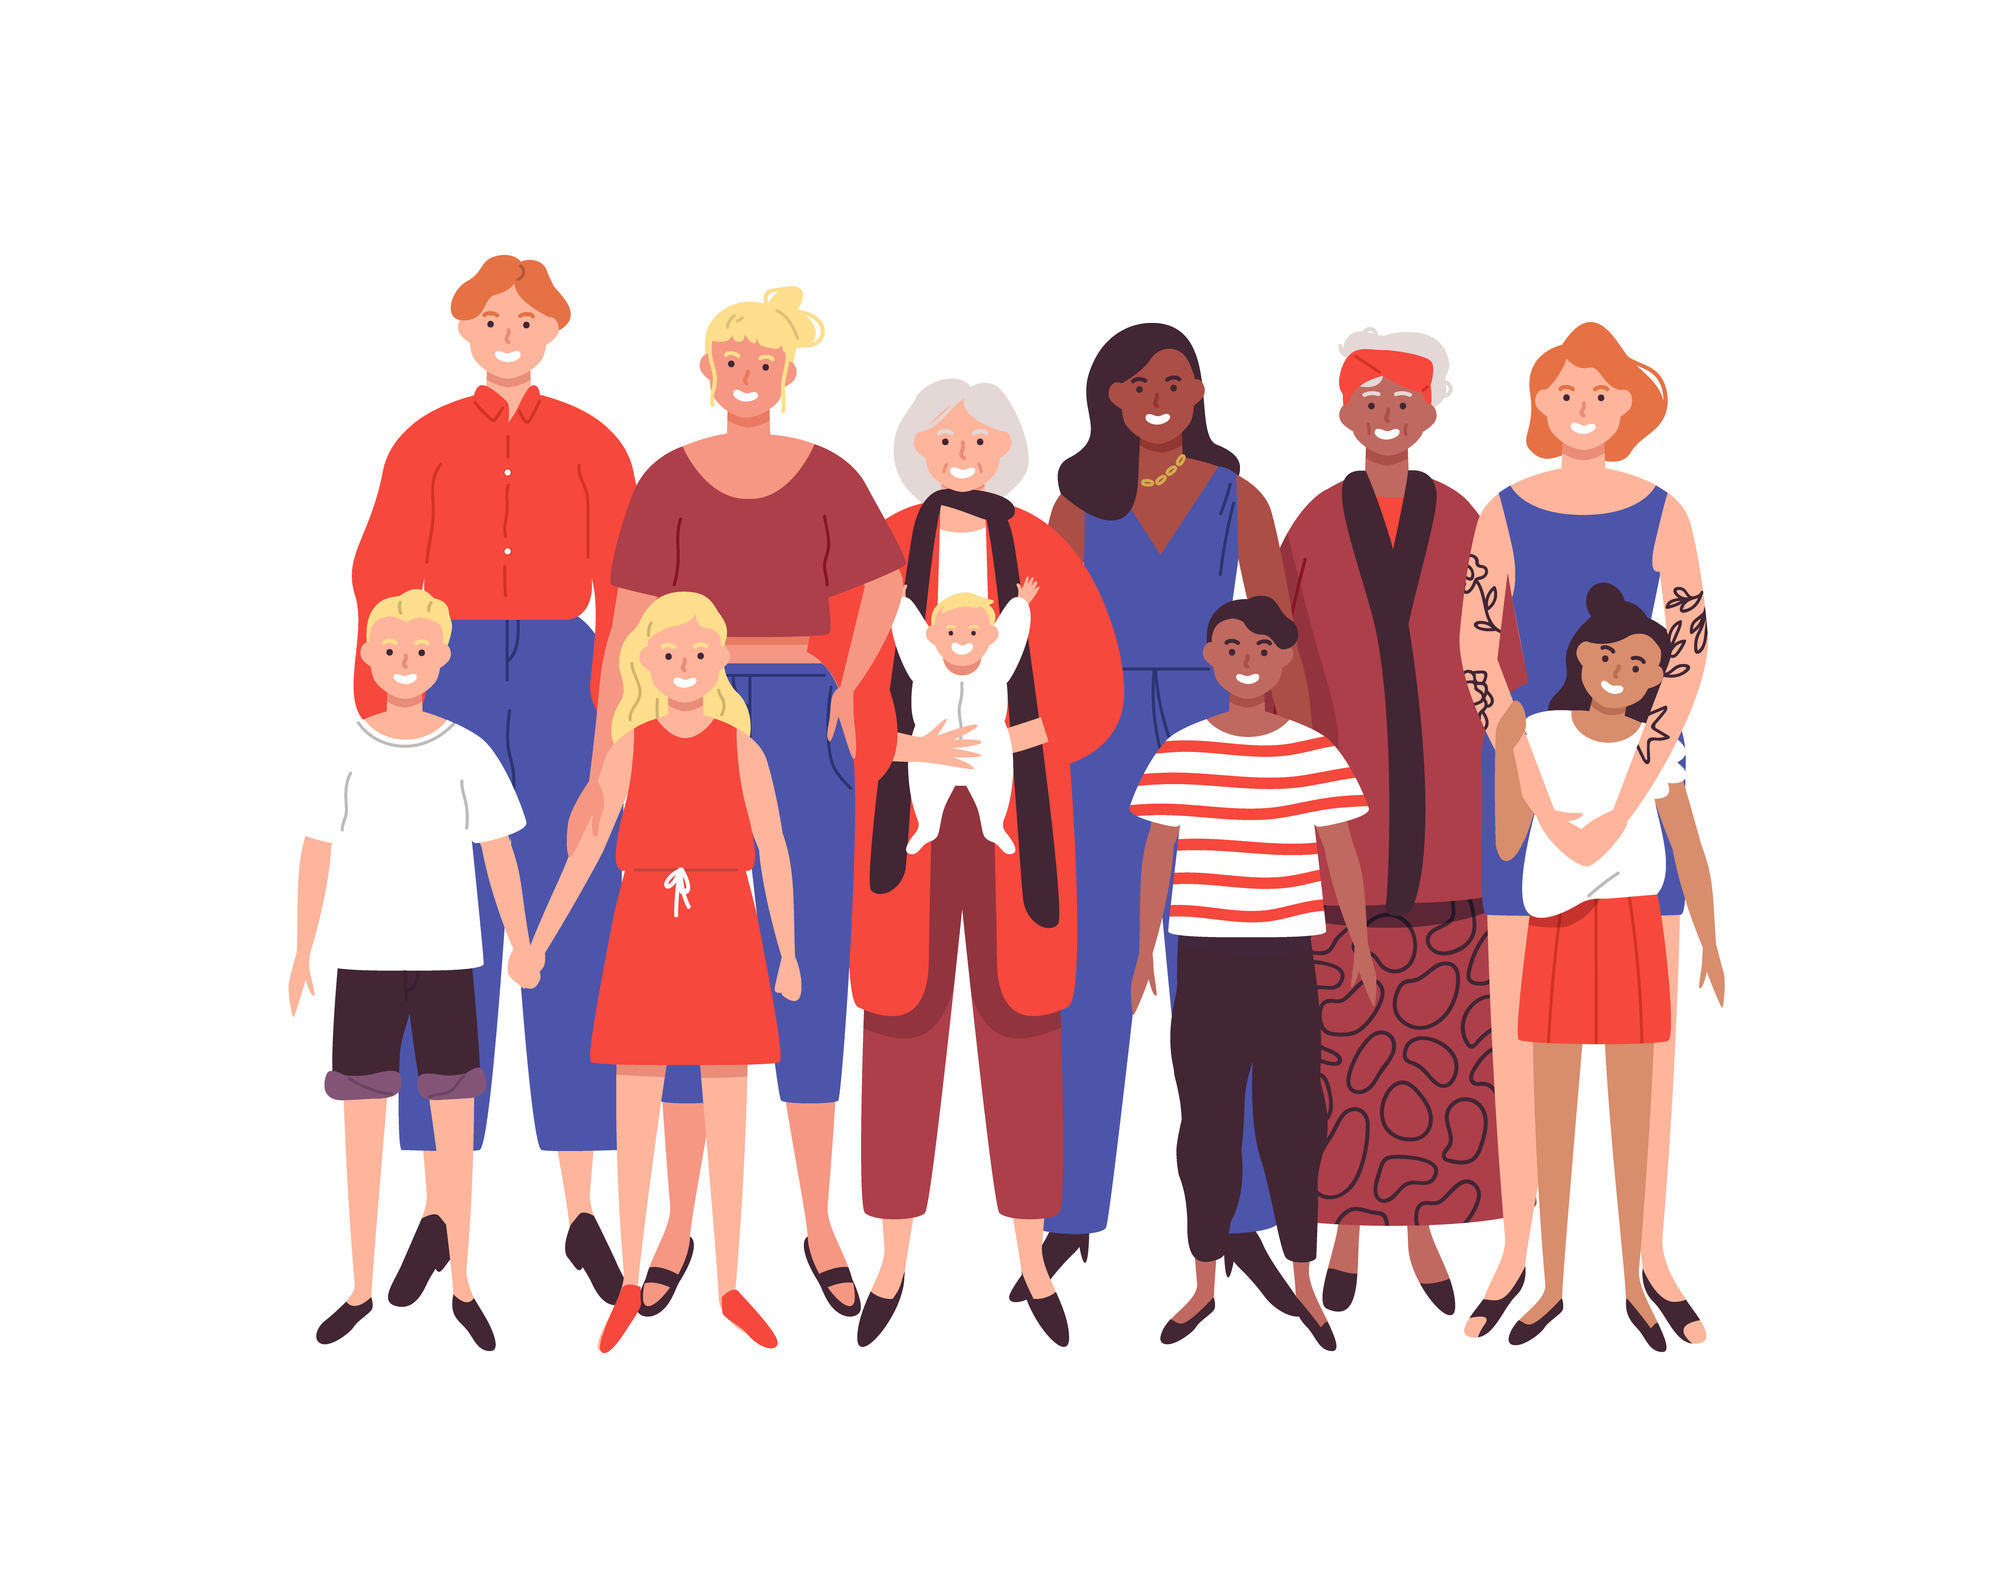 Multi generation group of women on isolated background. Family concept includes grandma, mother, children and baby.